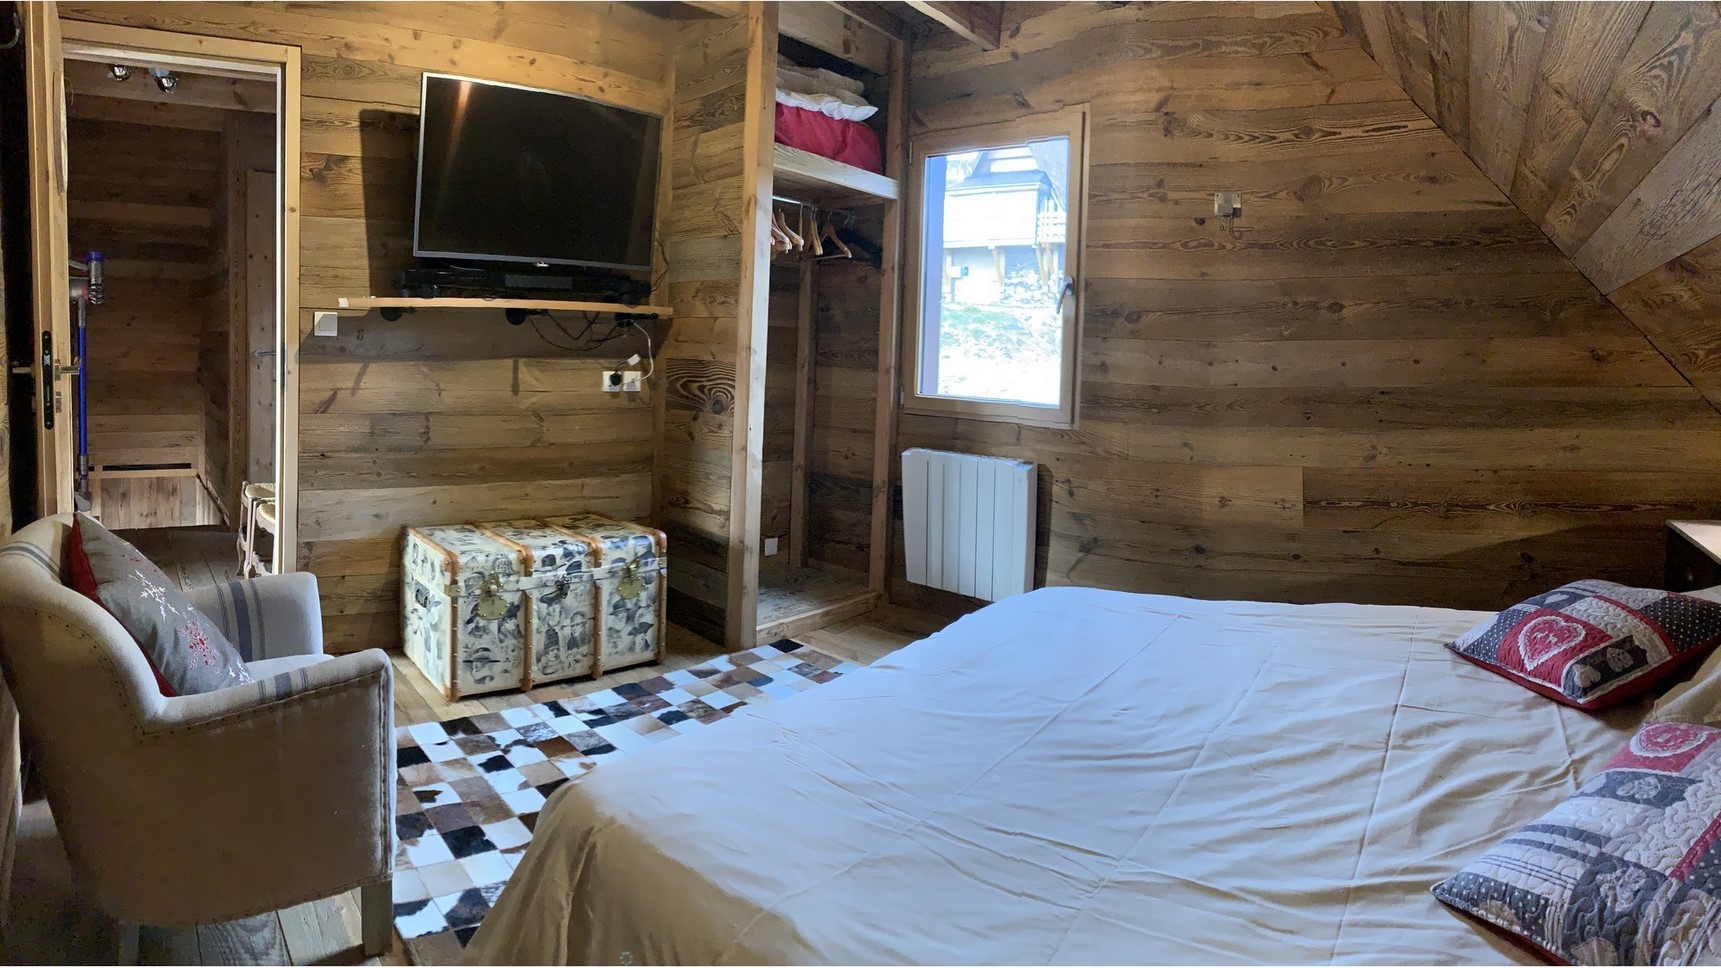 Super Besse chalet, Anorak chalet, Tyrolean room, screen and storage